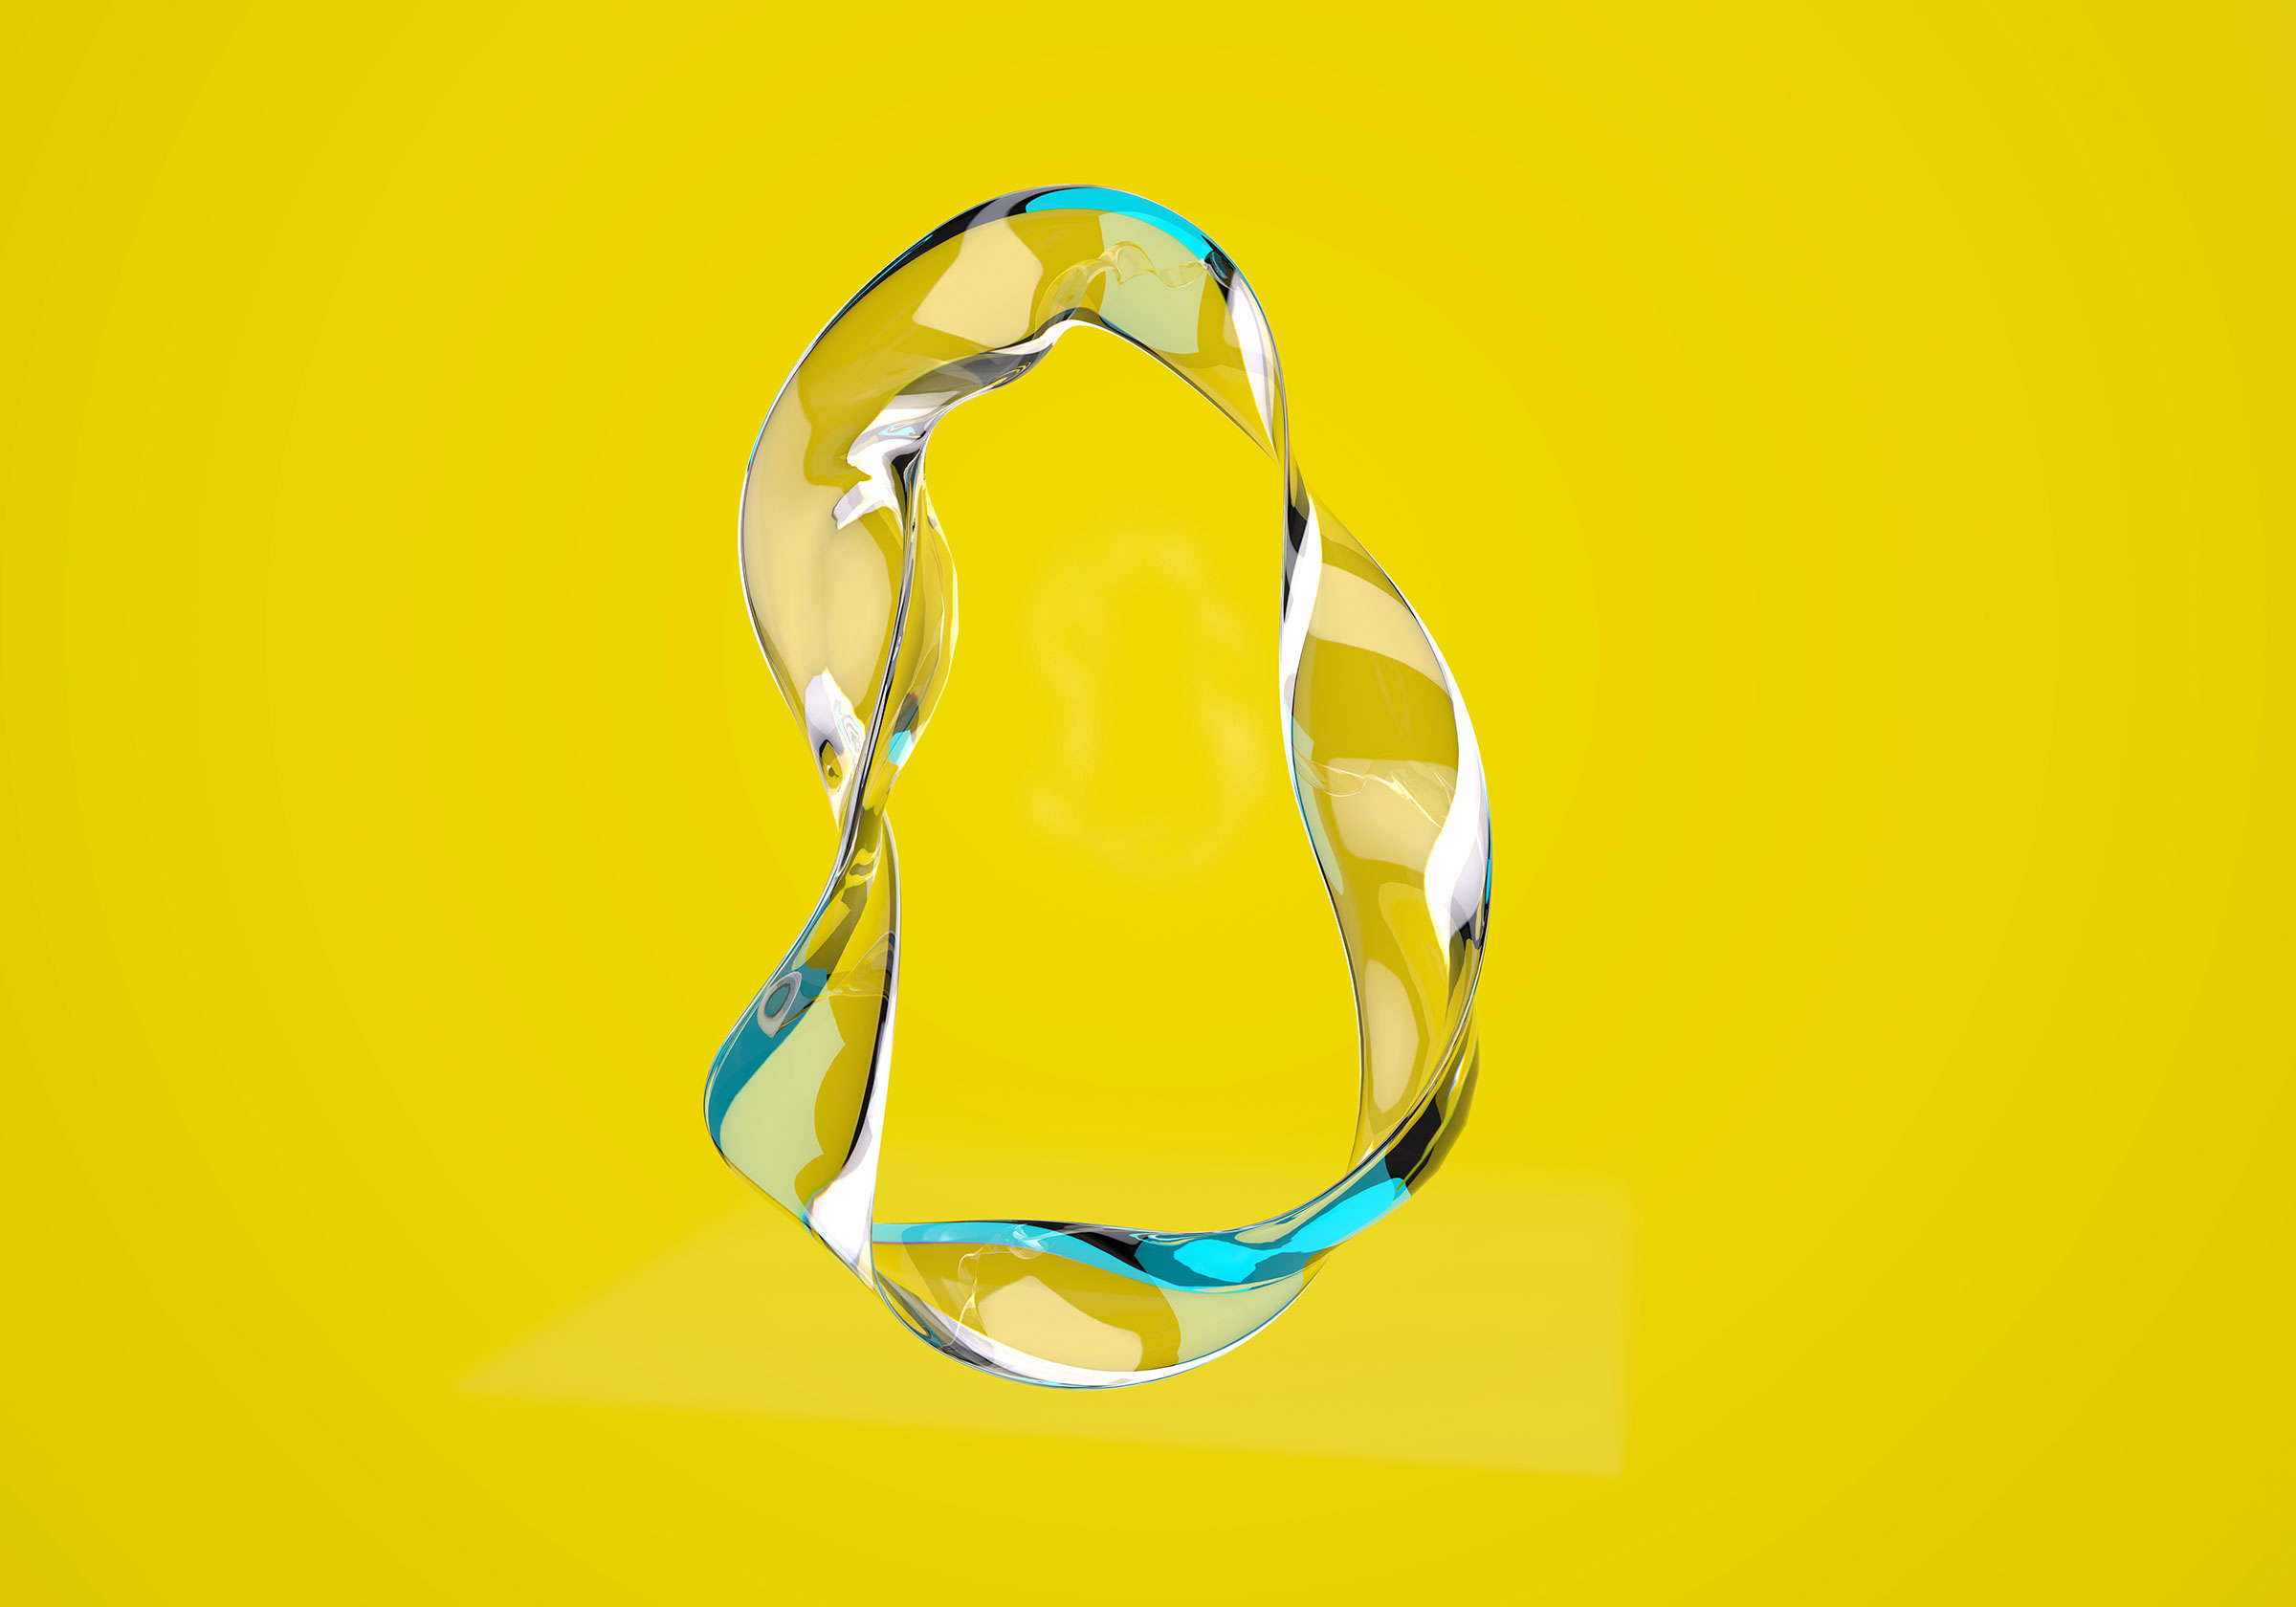 an abstract glass shape on a yellow background